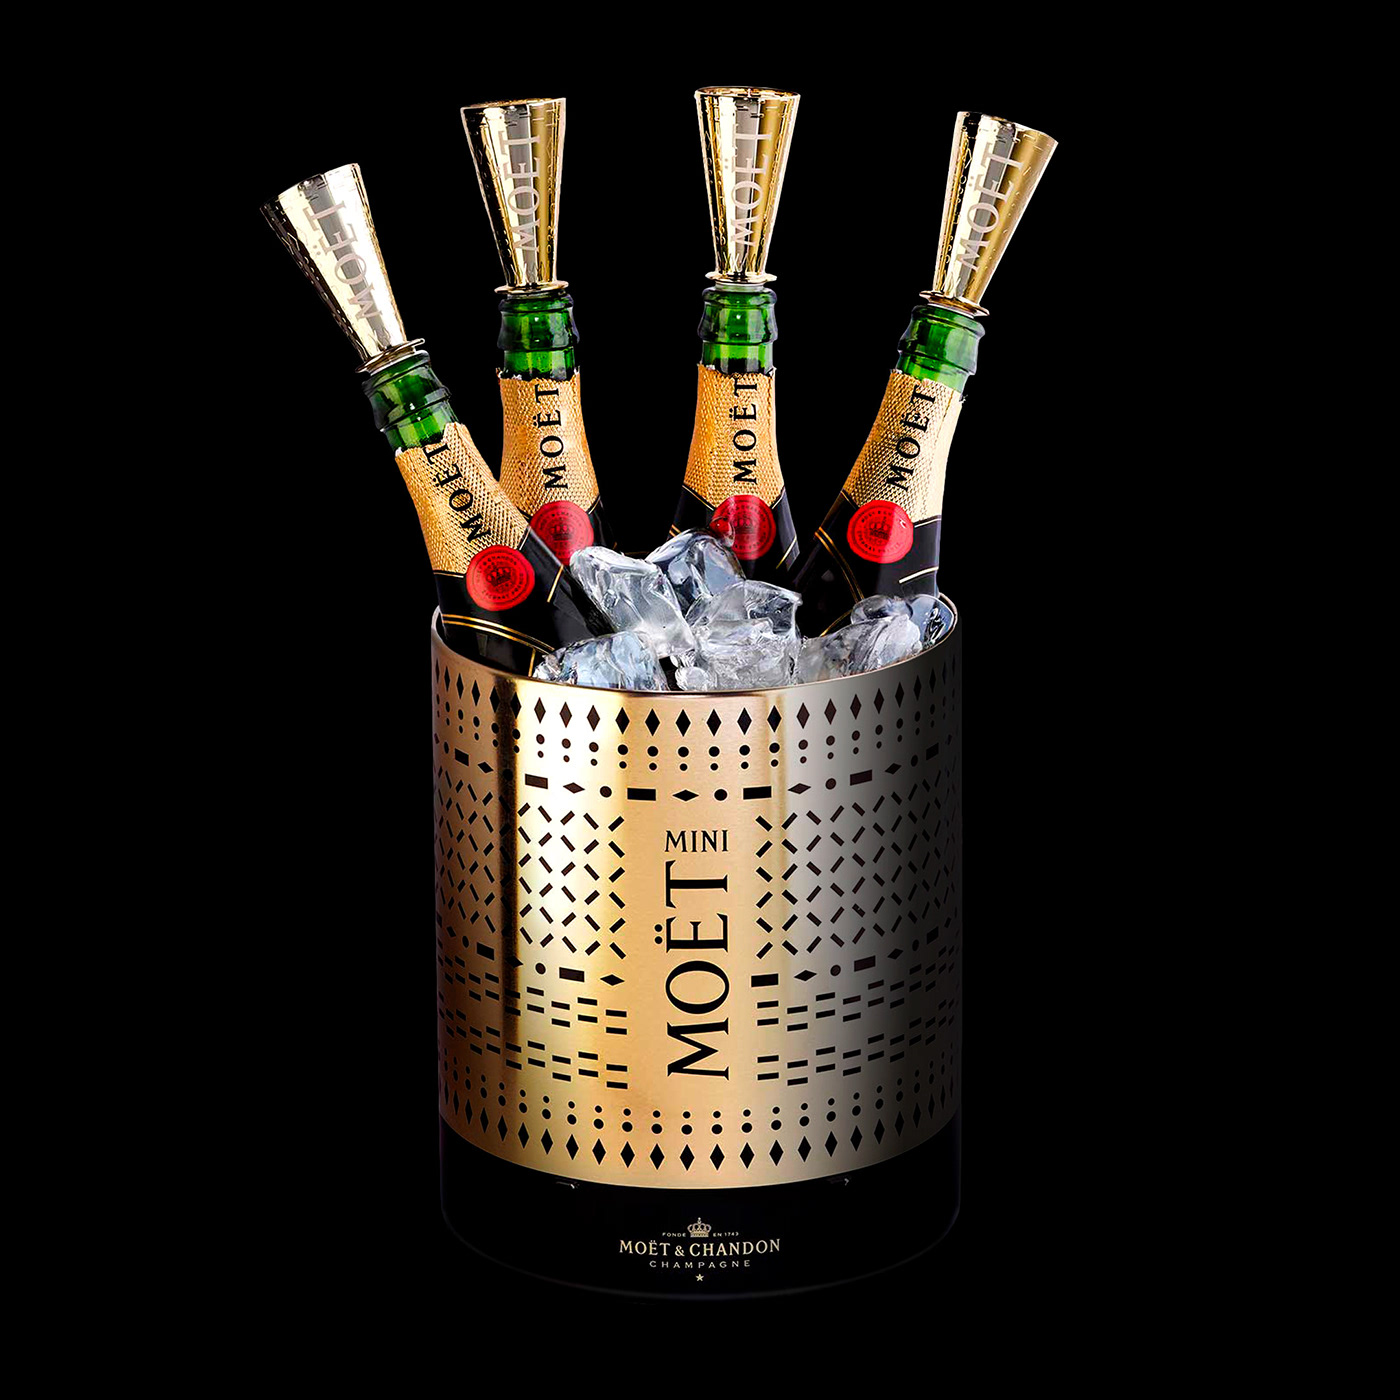 bottle Champagne gold Hedonism light luxury Moet Chandon Morrocco multifunction Patterns